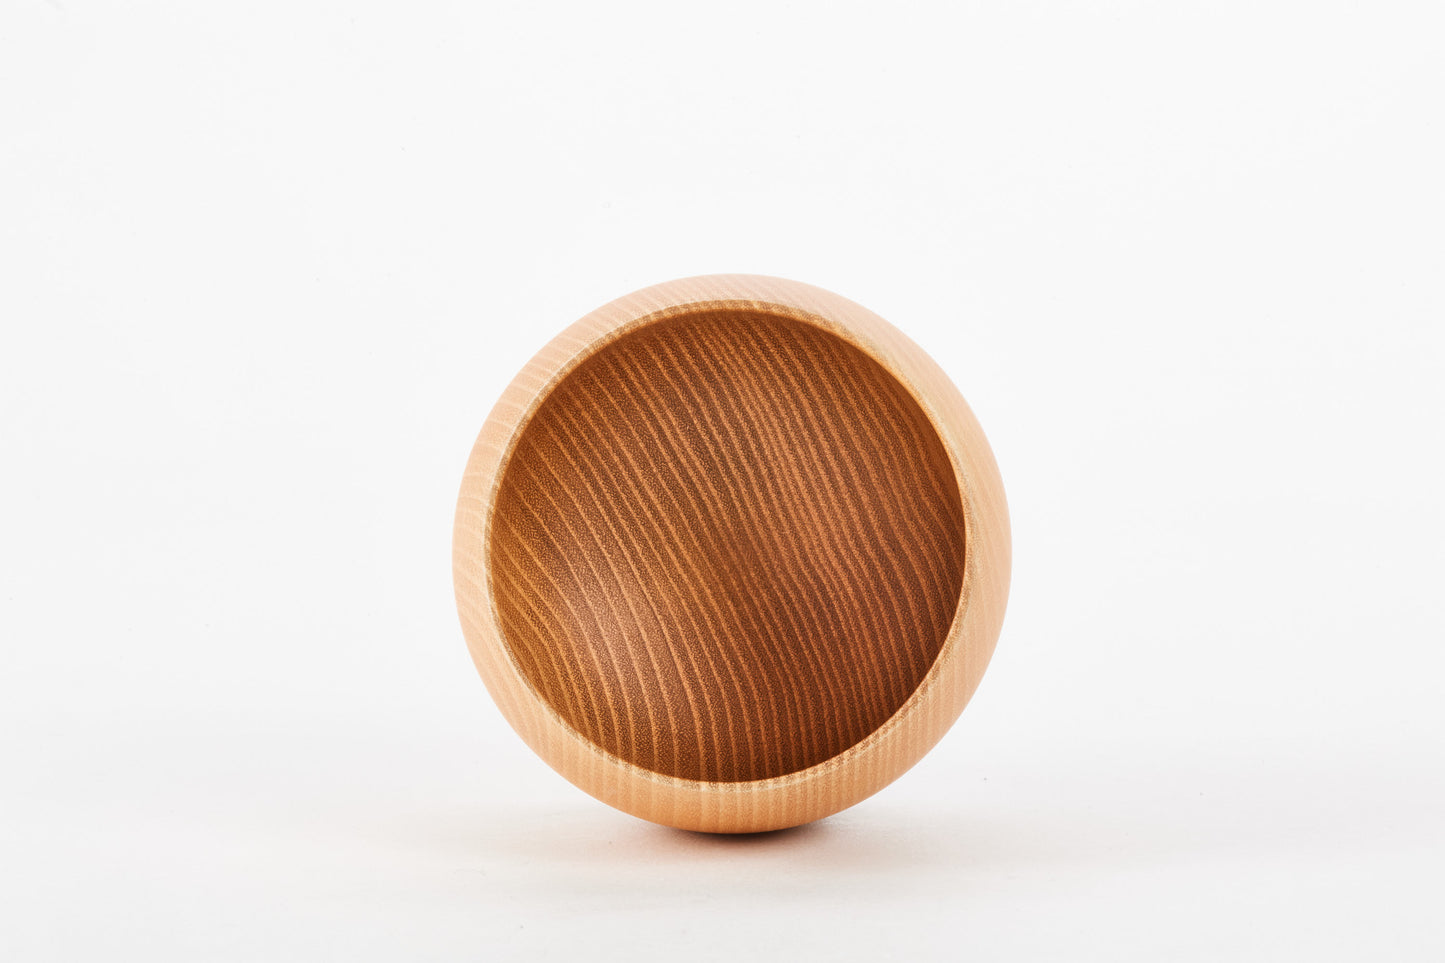 Japanese Wooden Cup - interior